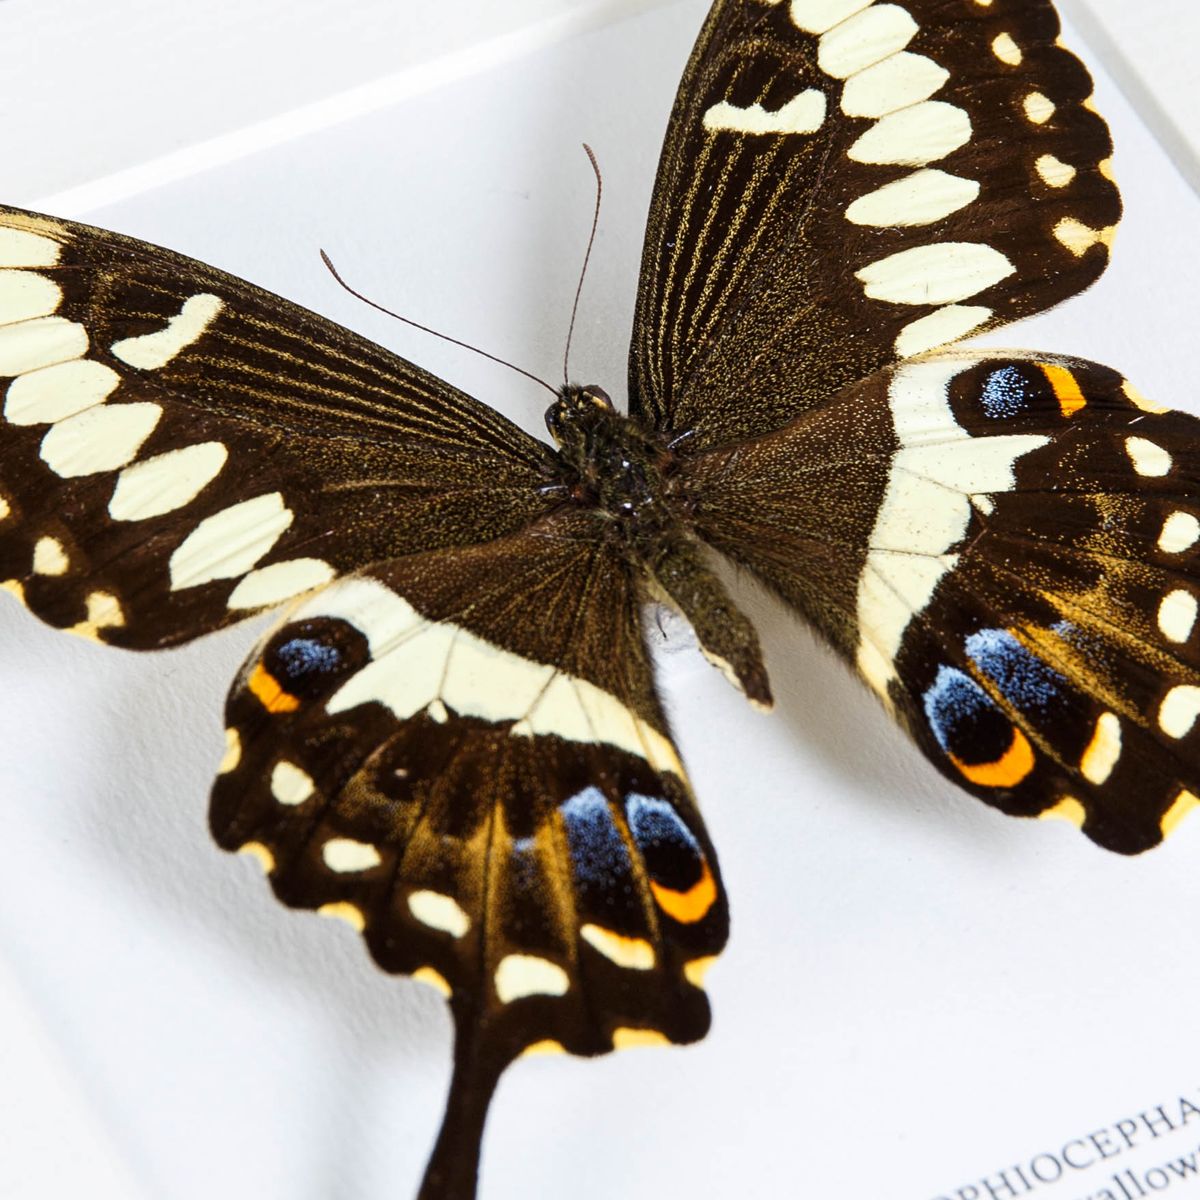 Emperor Swallowtail in Box Frame (Papilio ophidicephalus)